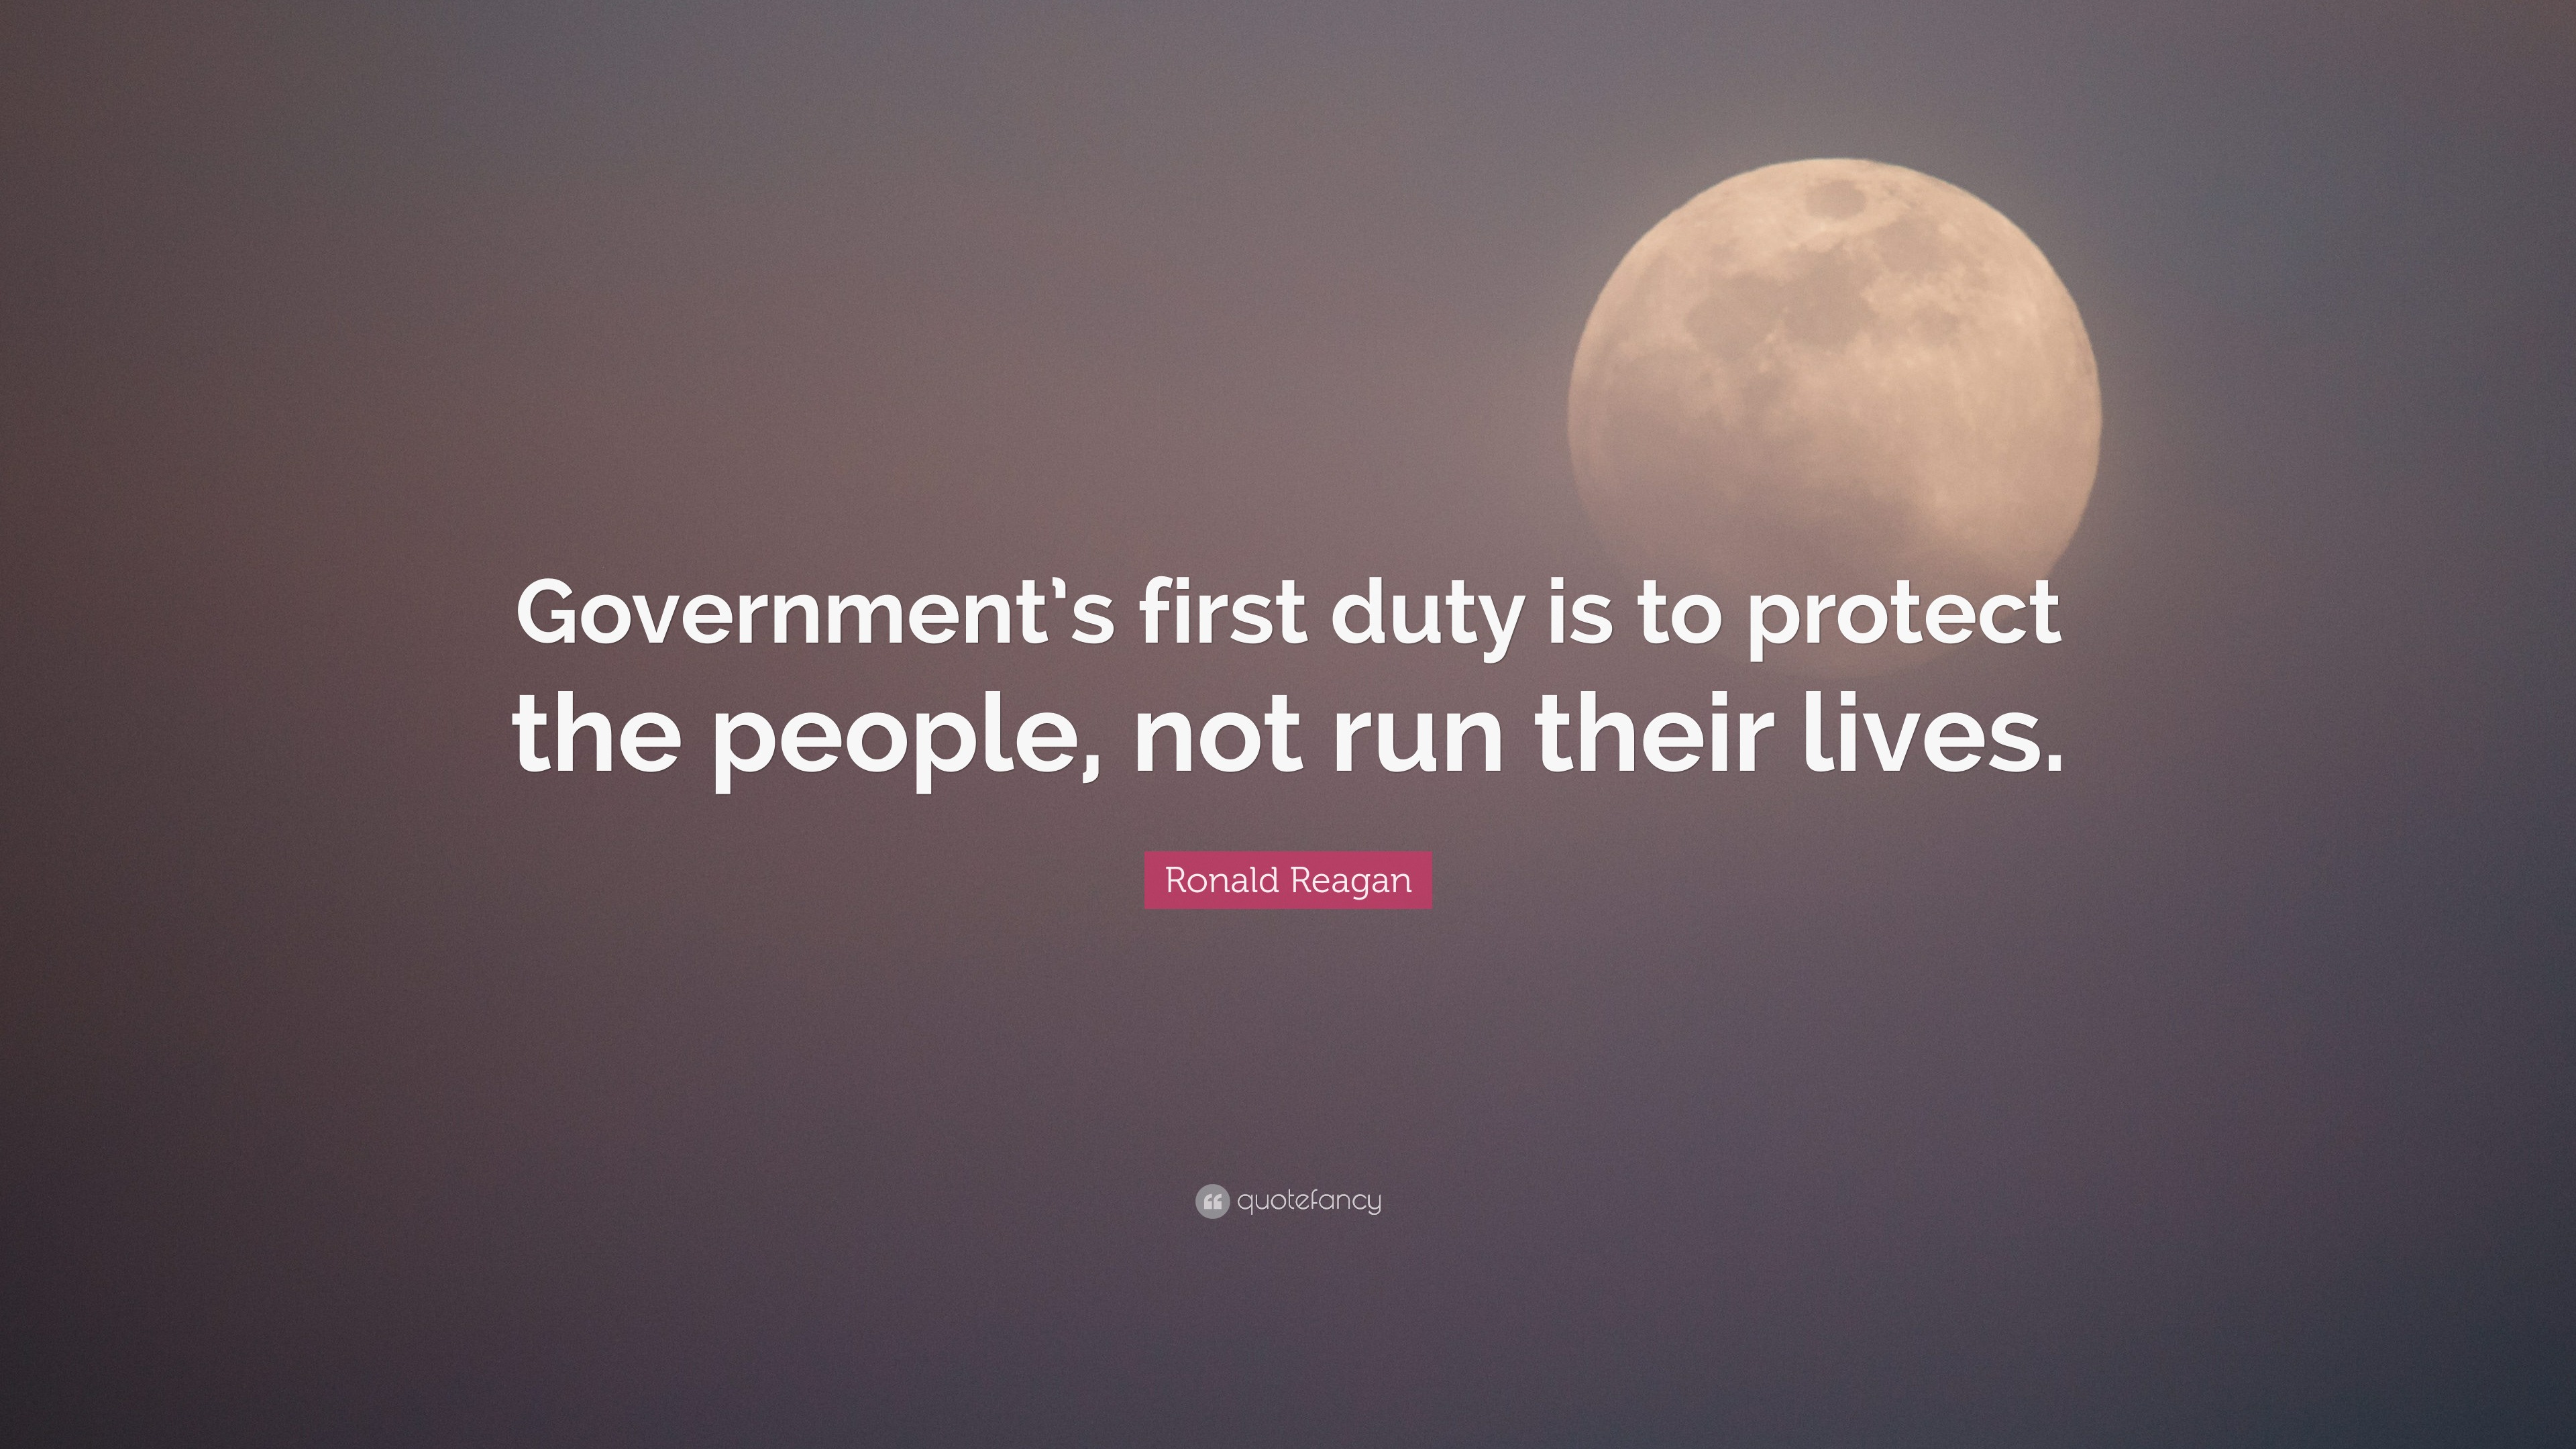 Ronald Reagan Quote “Government’s first duty is to protect the people